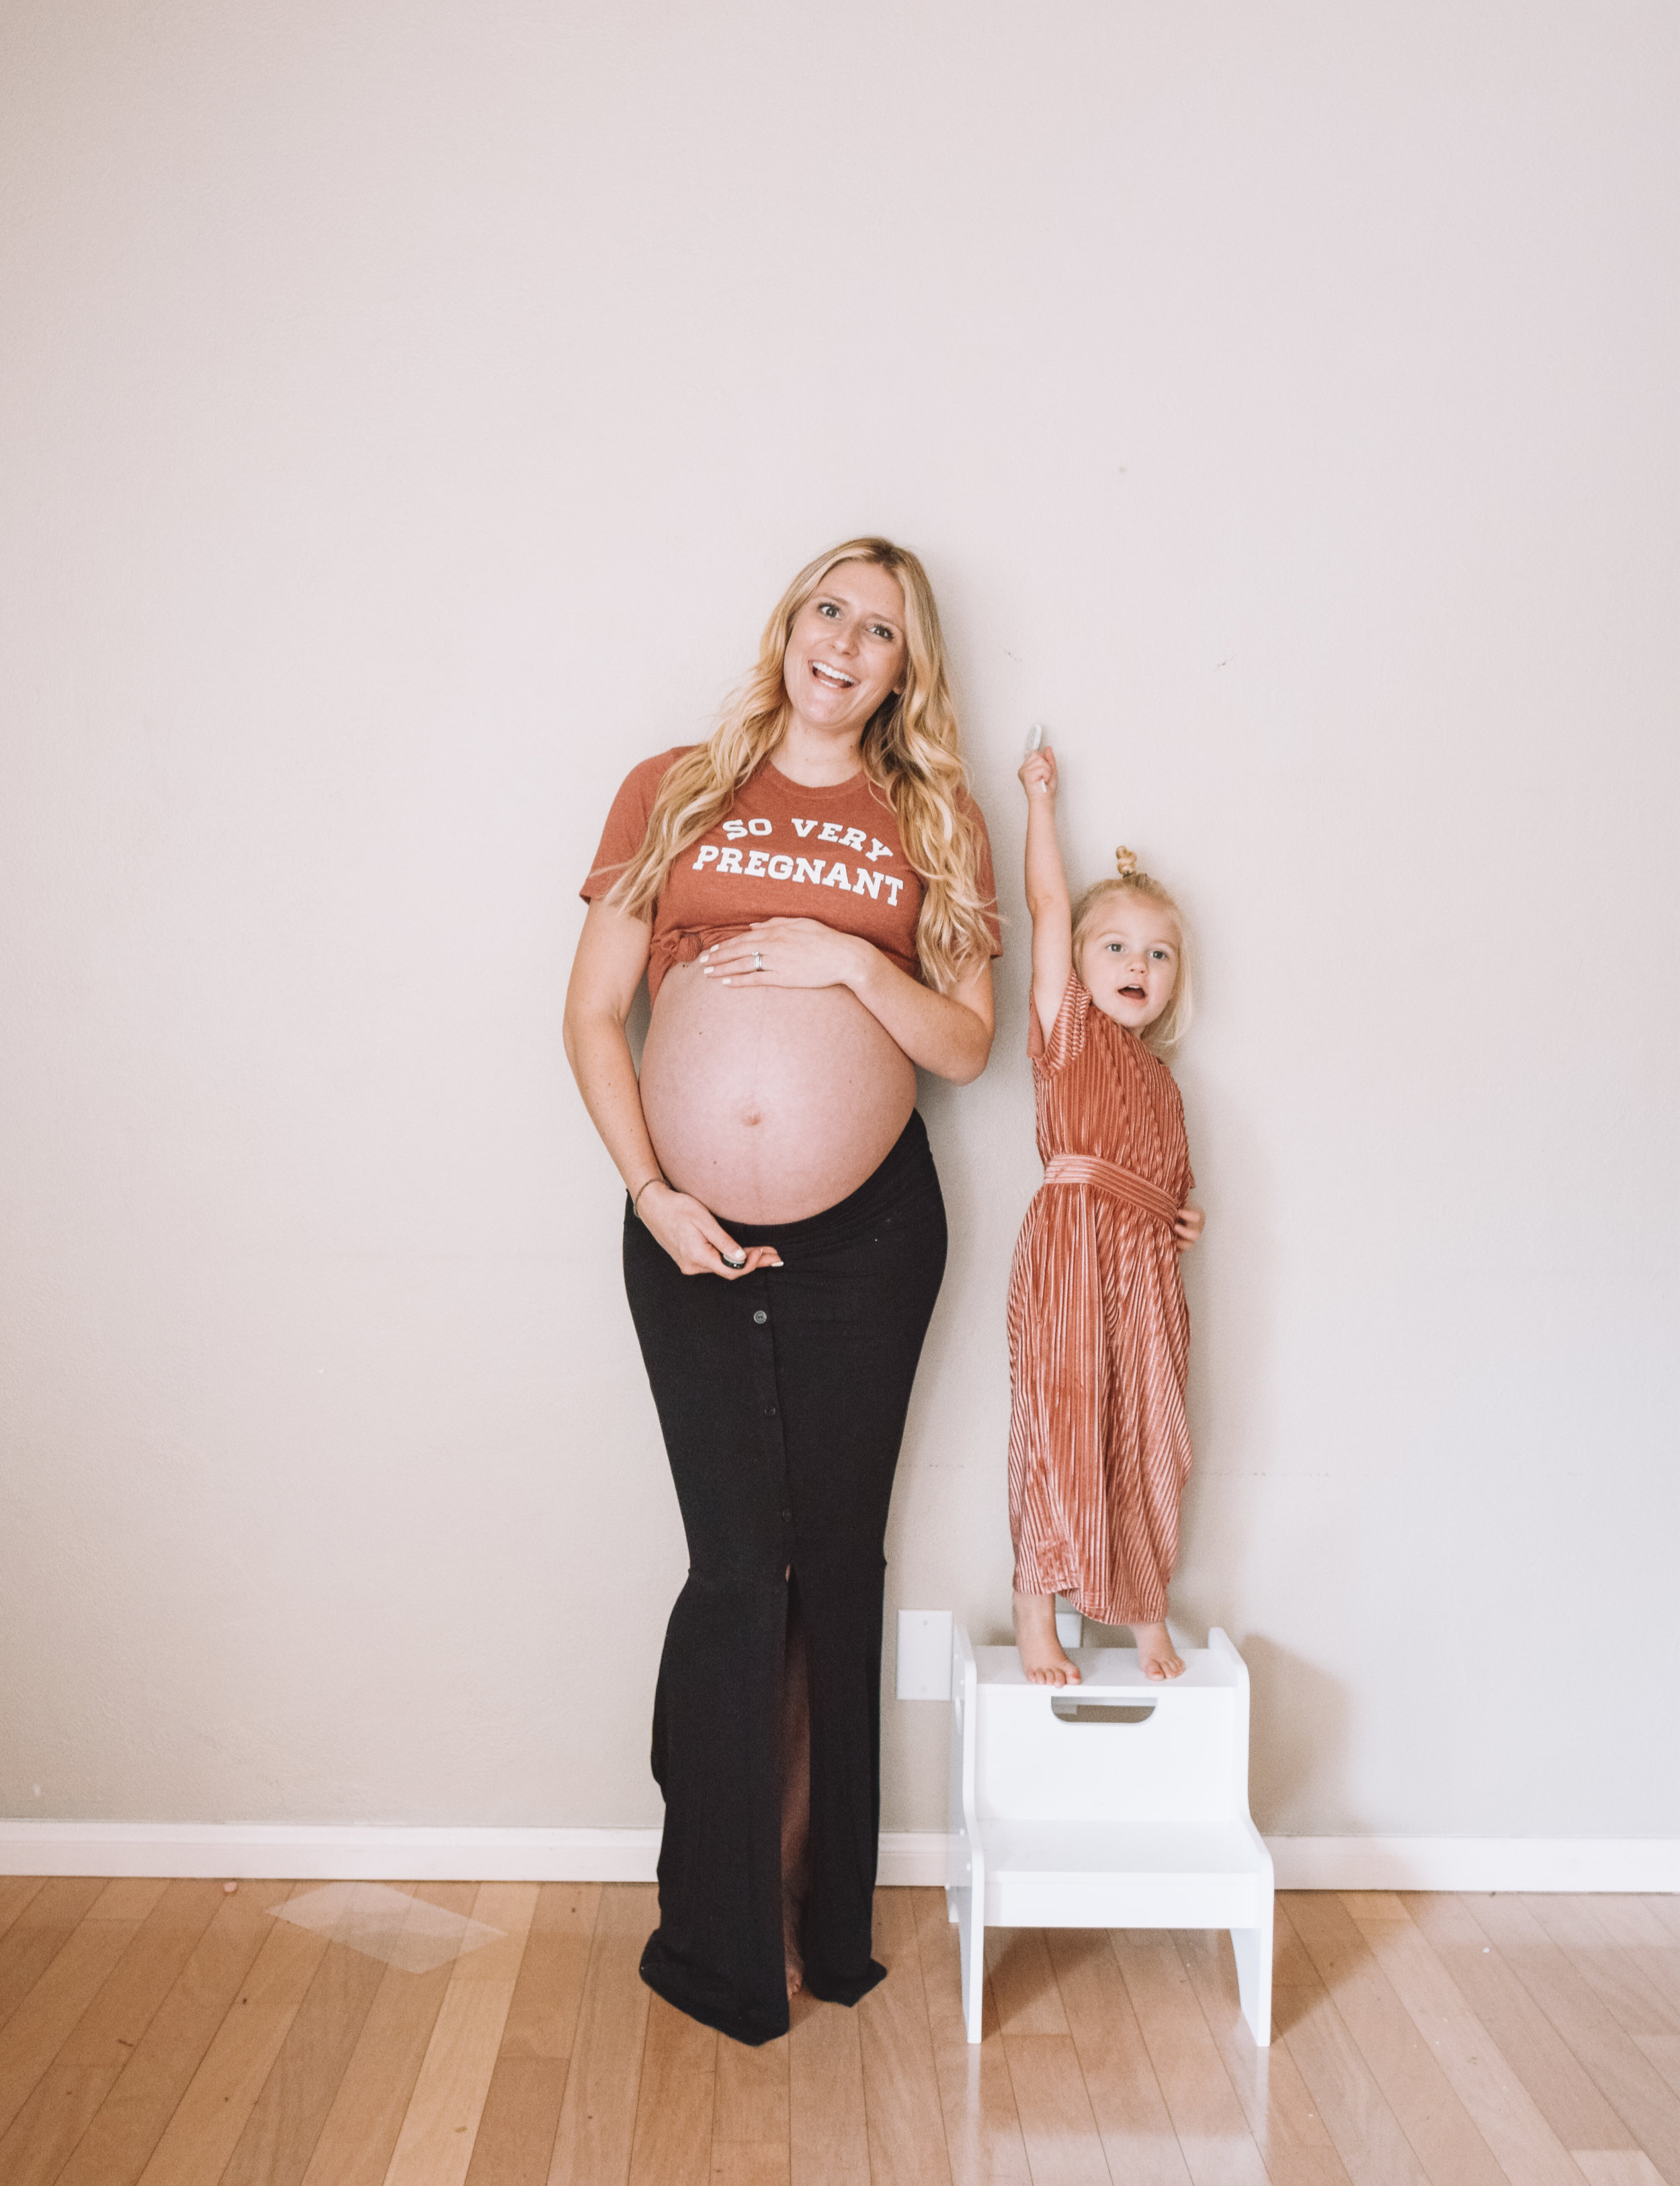 Funny Pregnancy Shirts - Cute Weekly Pregnancy Photos - The Overwhelmed Mommy Blogger